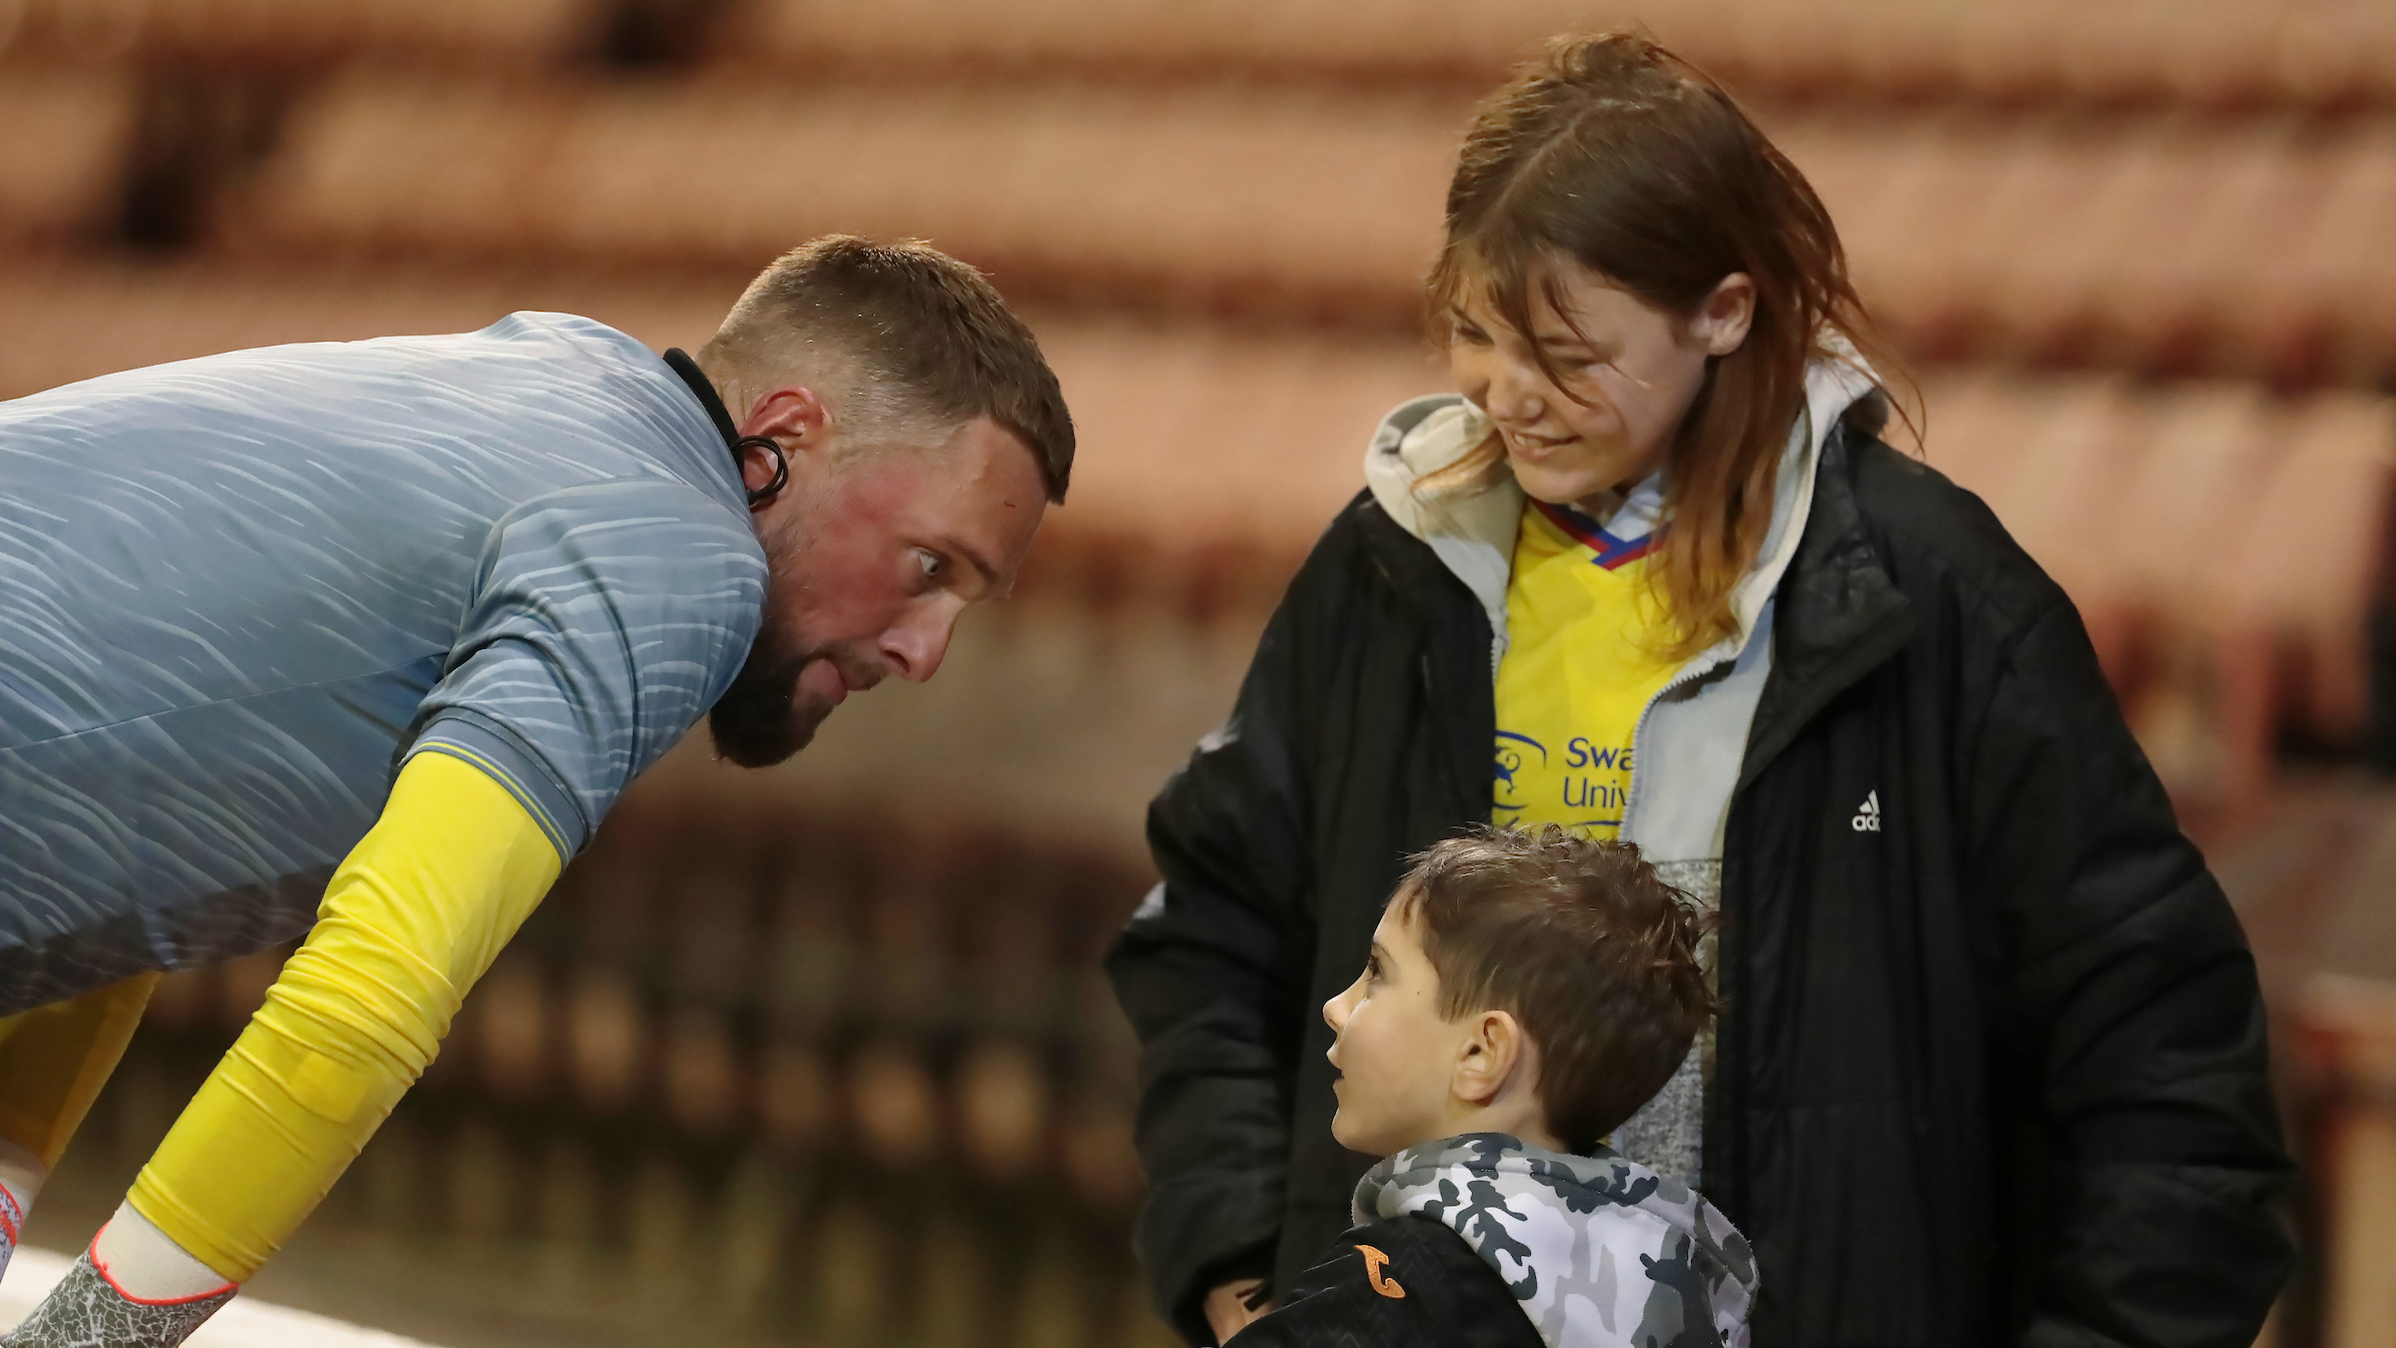 Russell Martin pays tribute to pair ahead of Swansea City farewells